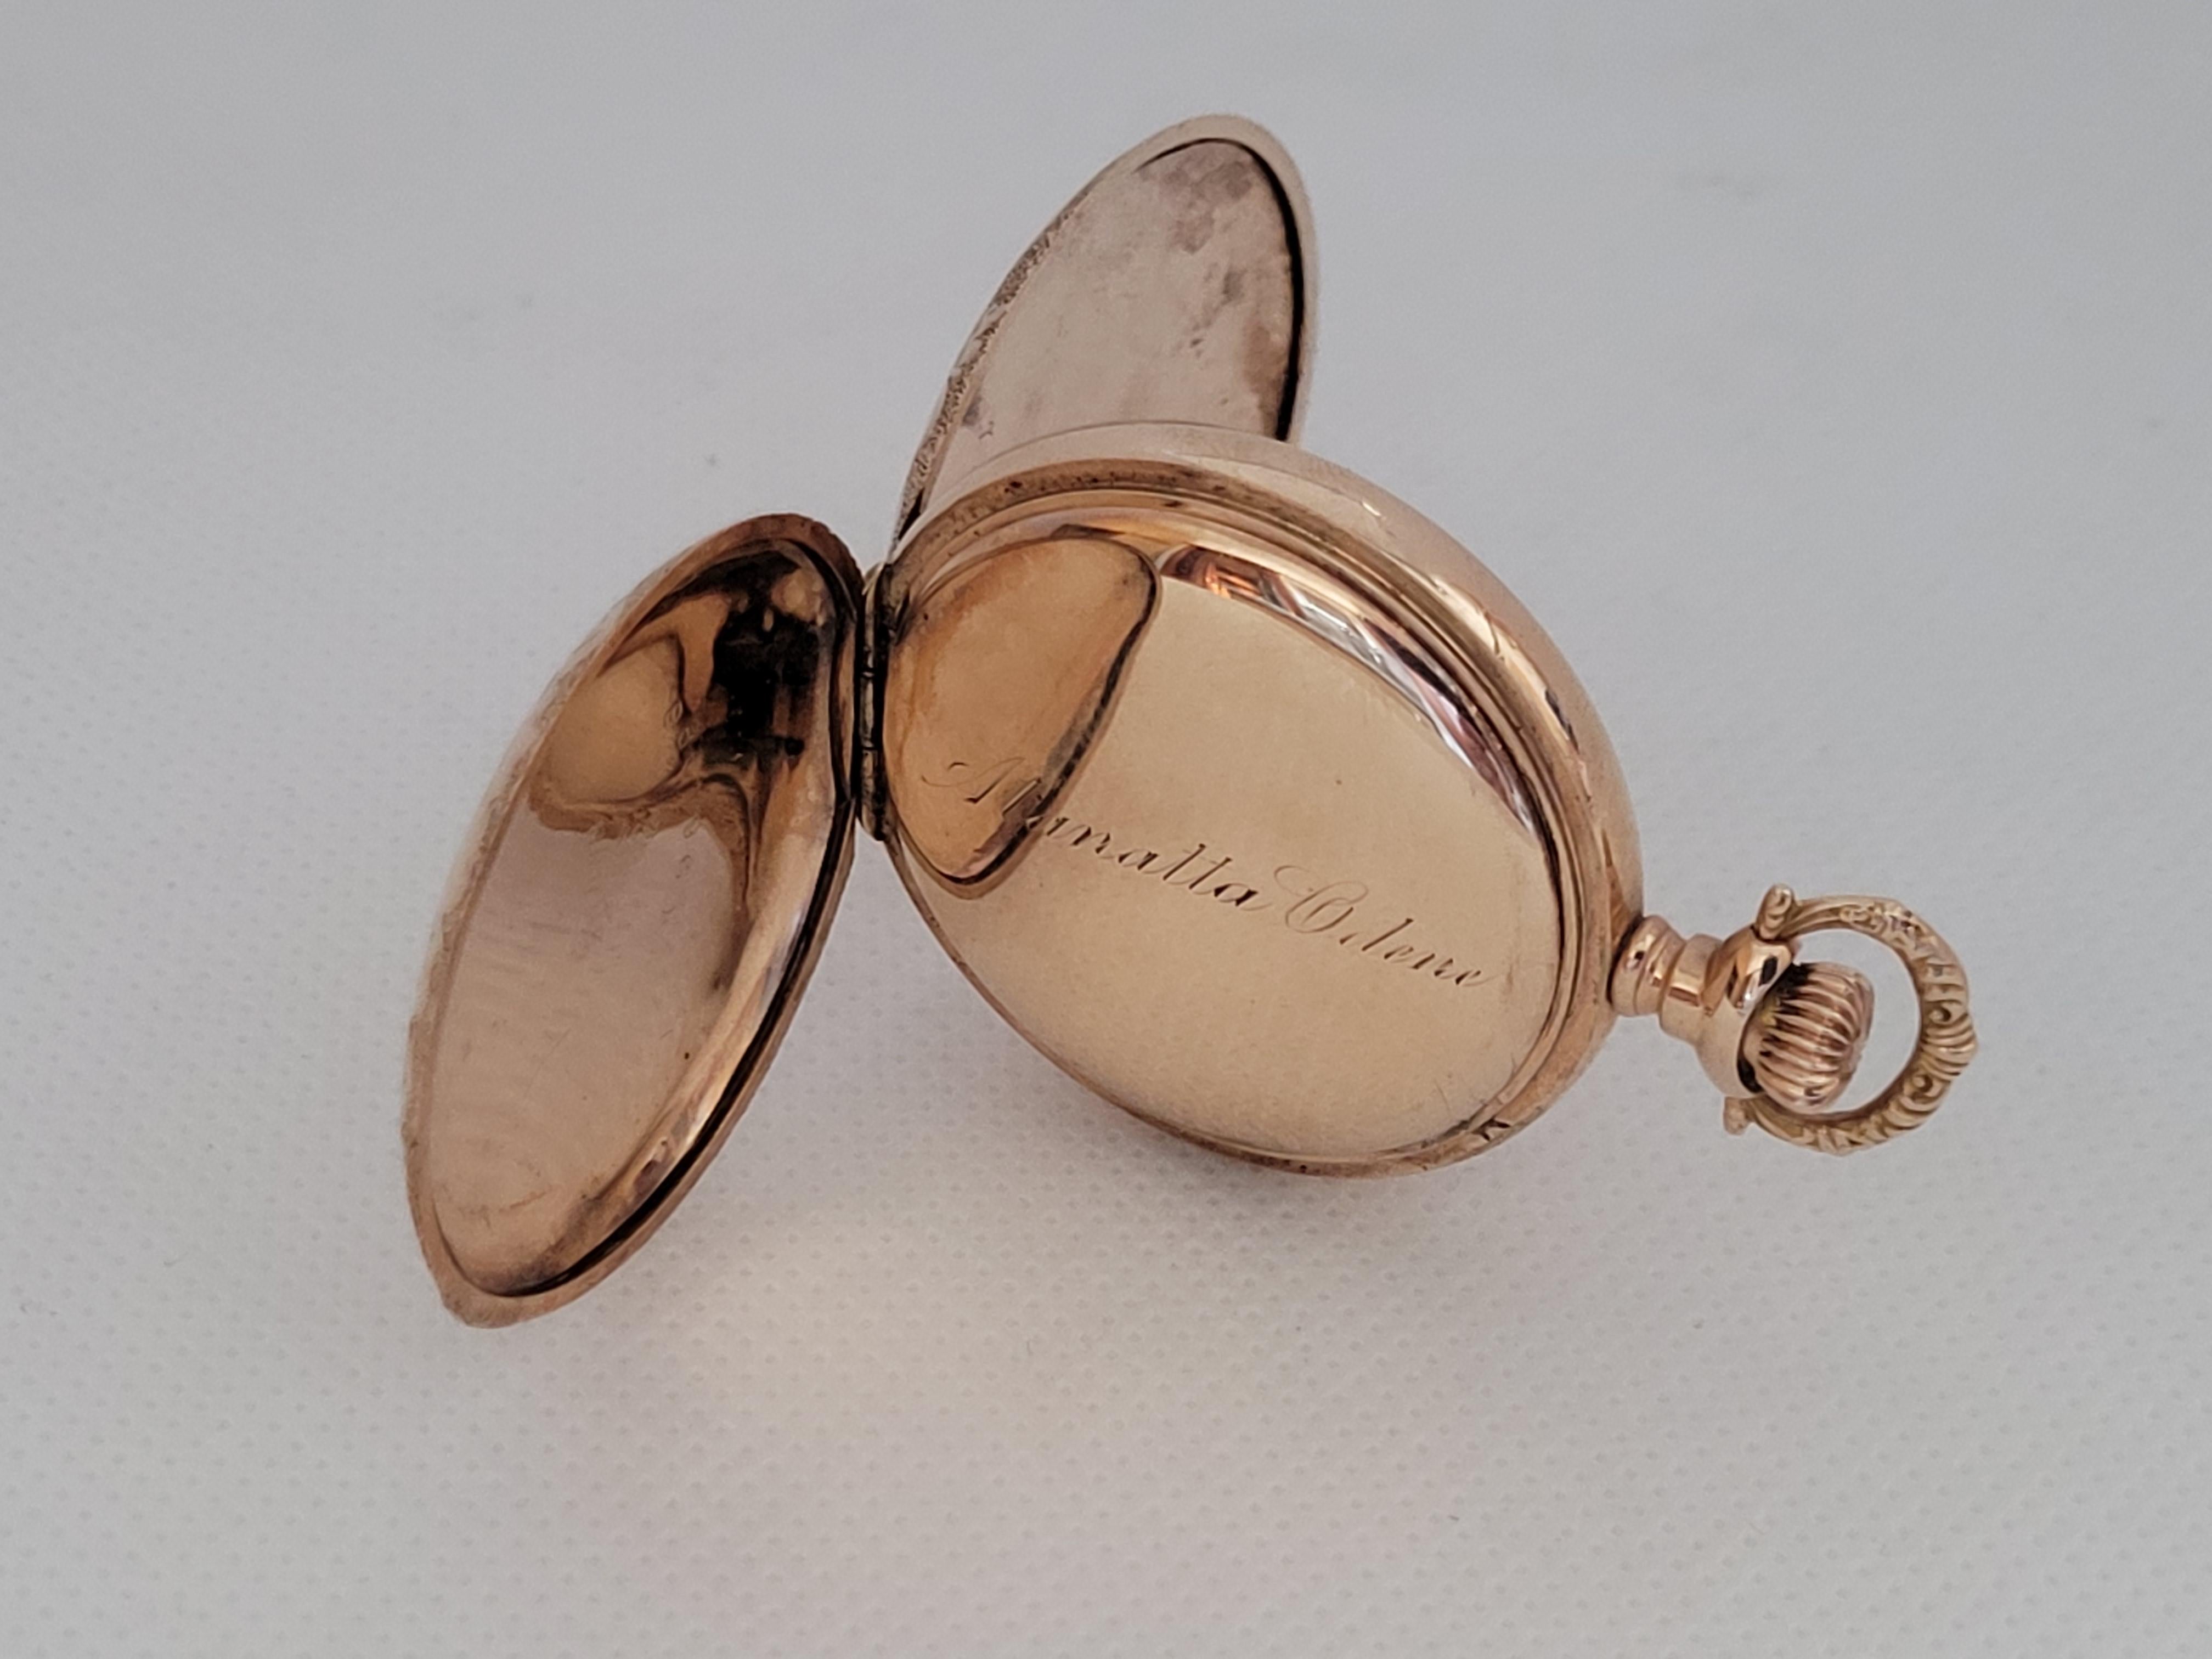 Waltham Pocket Watch Gold Plated Working #16360616 15 Jewels Os Size For Sale 1